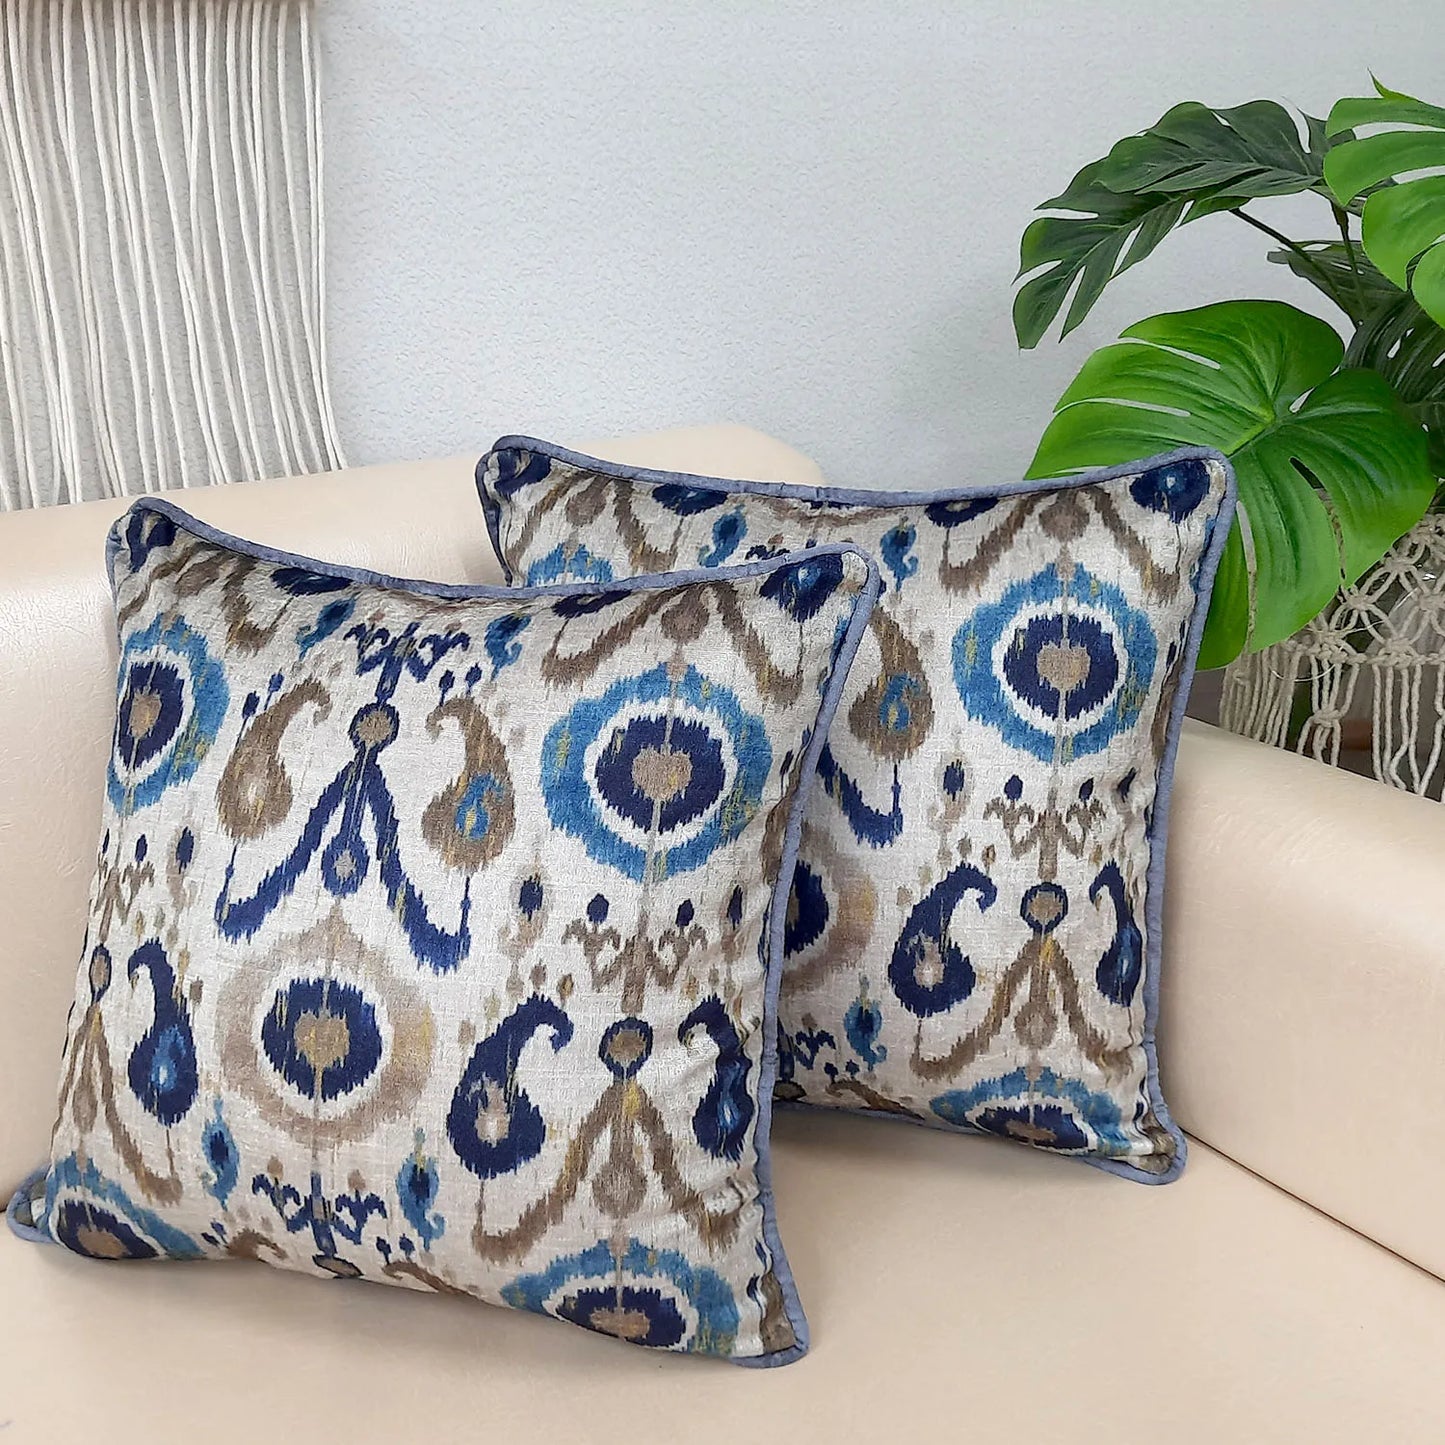 Cushion Cover with Filler – Ikat Beautiful Design -40cm x 40cm – Set of 2